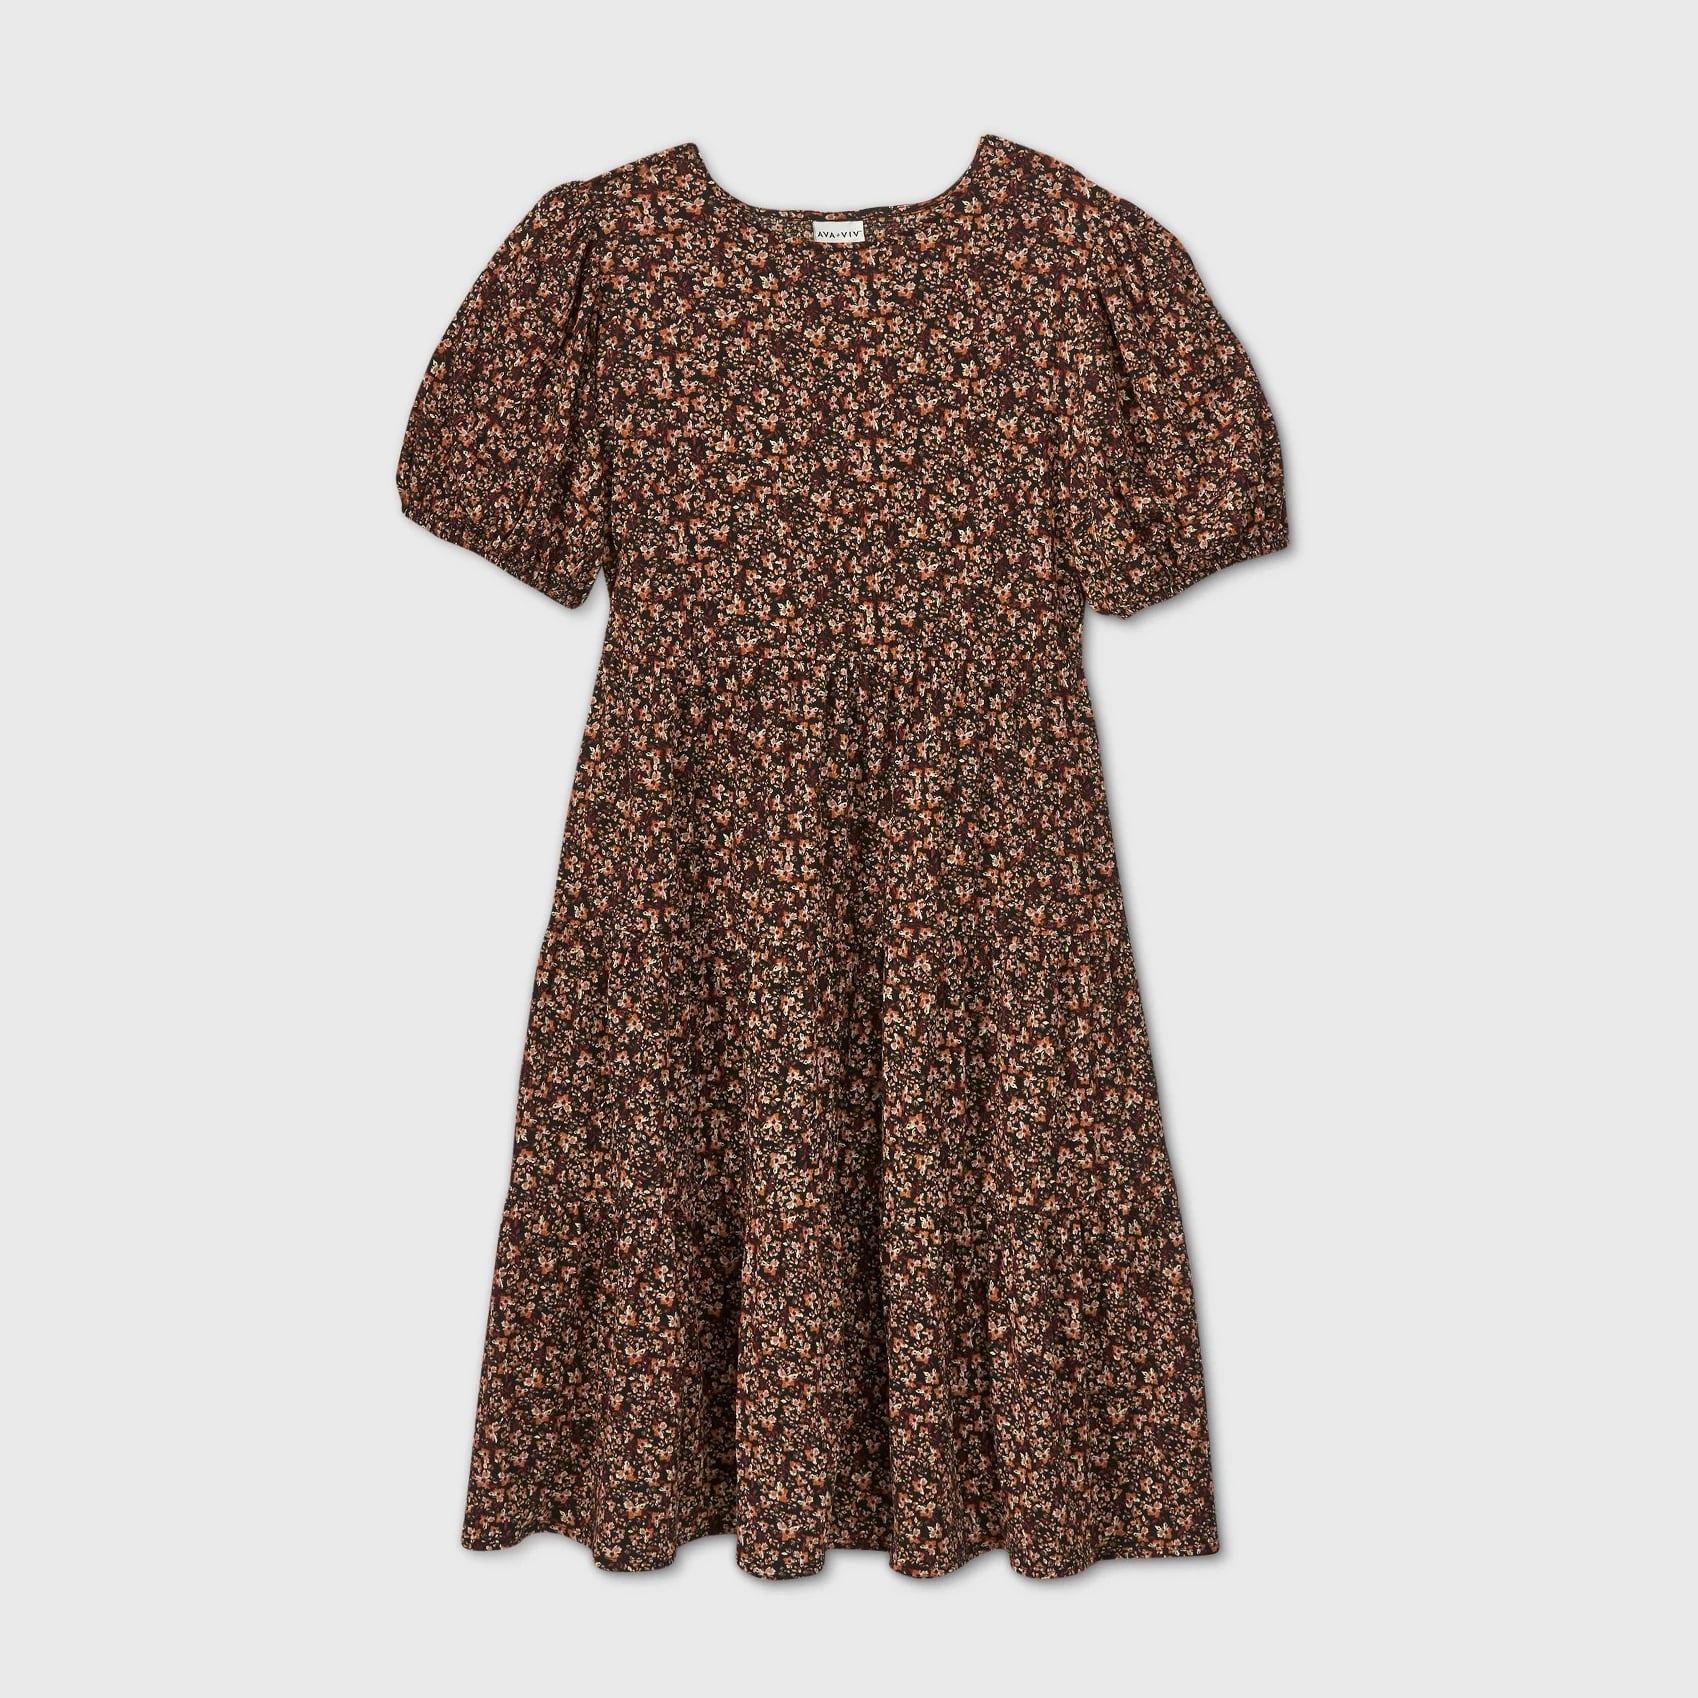 Ava & Viv Floral Print Short-Sleeve Knit Tiered Dress, 19 Bestselling  Target Pieces in September, and How Women Are Wearing Them